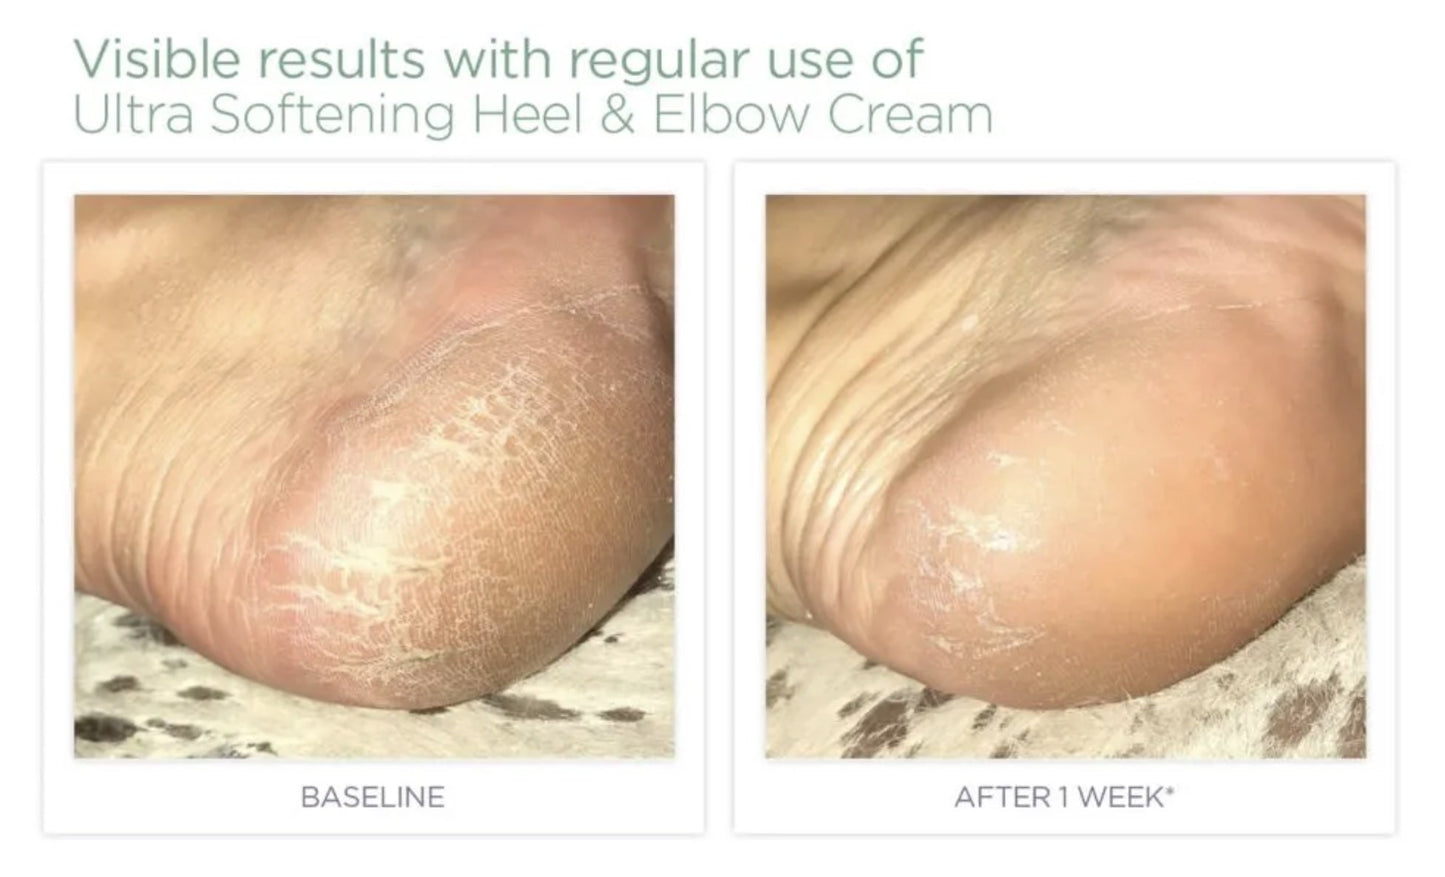 Glytone-ultra-softening-heel-elbow-cream-before-after-specialty-dca-advanced-skincare-center-before-after